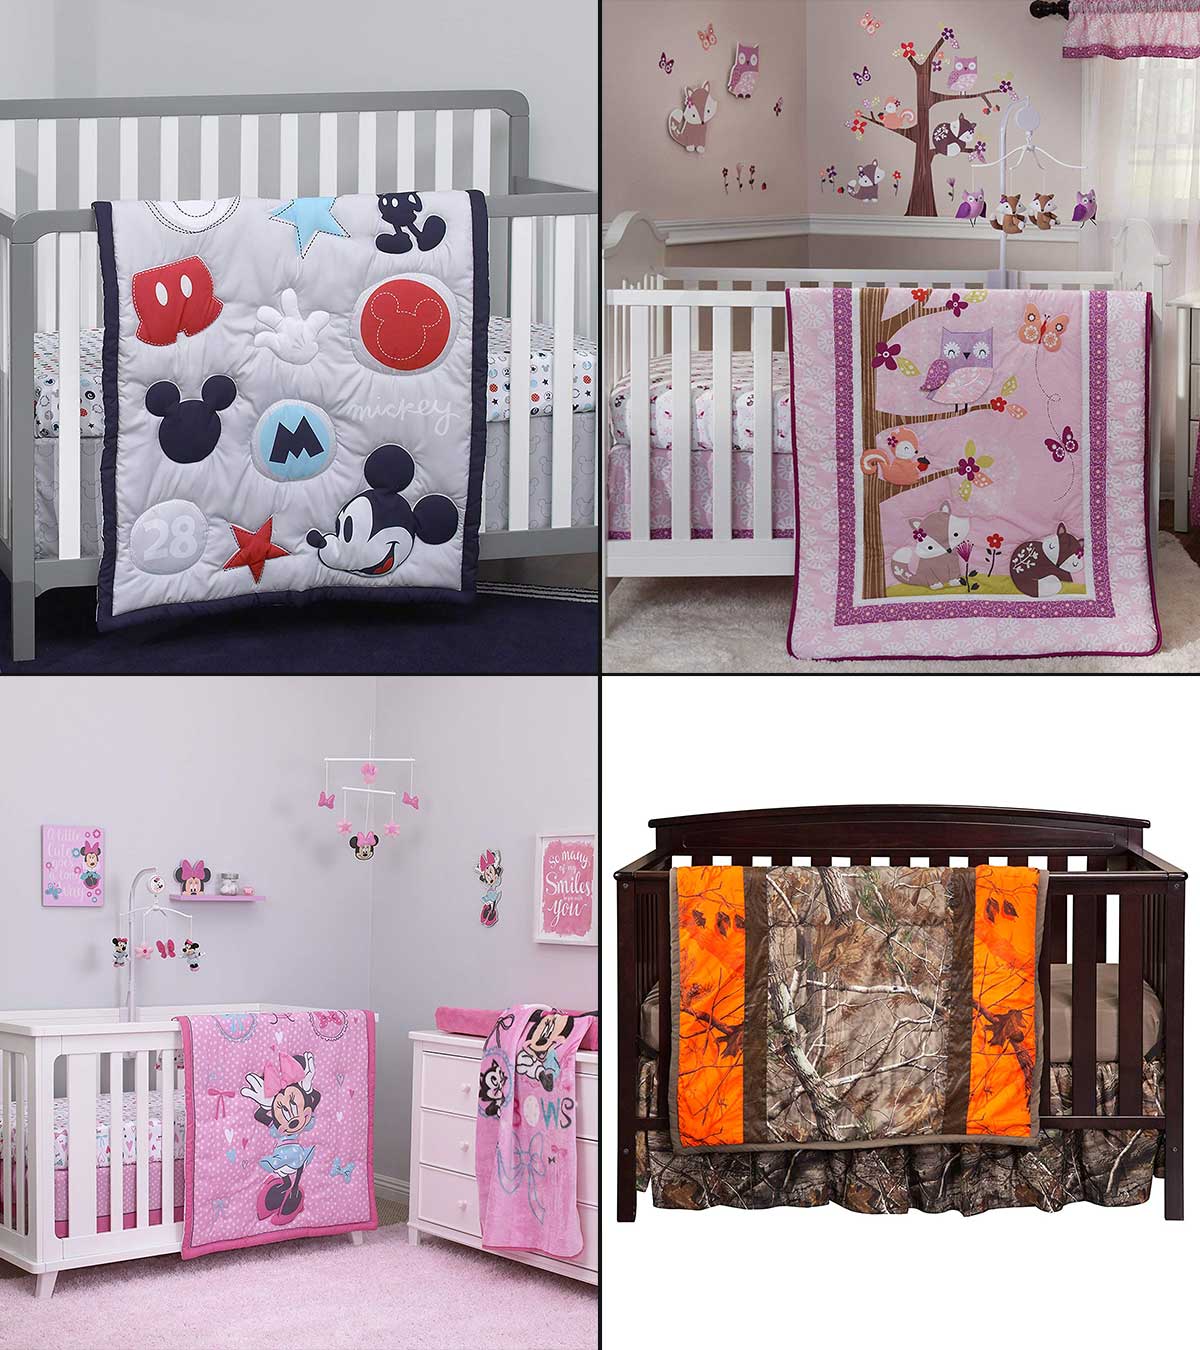 BABY BEDDING SET 135x100 COT BED QUILT DUVET PILLOW CASE COVER NURSERY NEWDESIGN 